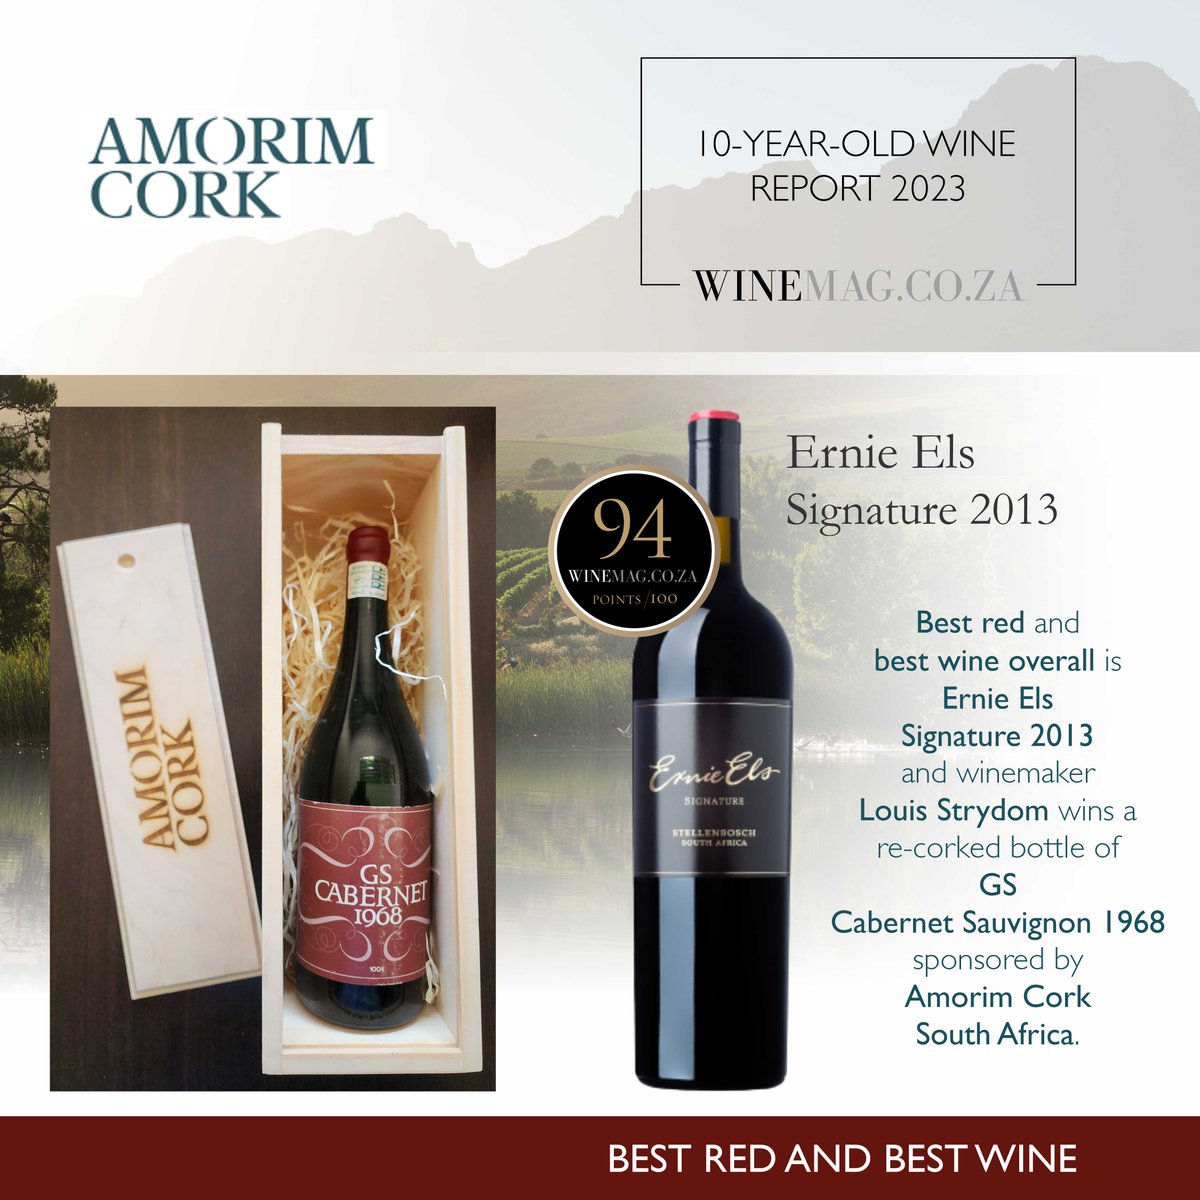 Congratulations to the Ernie Els Signature 2013 (@ernieelswines), winner of the best red and best overall wine for the Amorim 10-Year-Old Report!

94 Points!

bit.ly/3L5P9Tl

__________
@amorim_za

#drinksouthafrican #winesofsouthafrica #southafricanwine